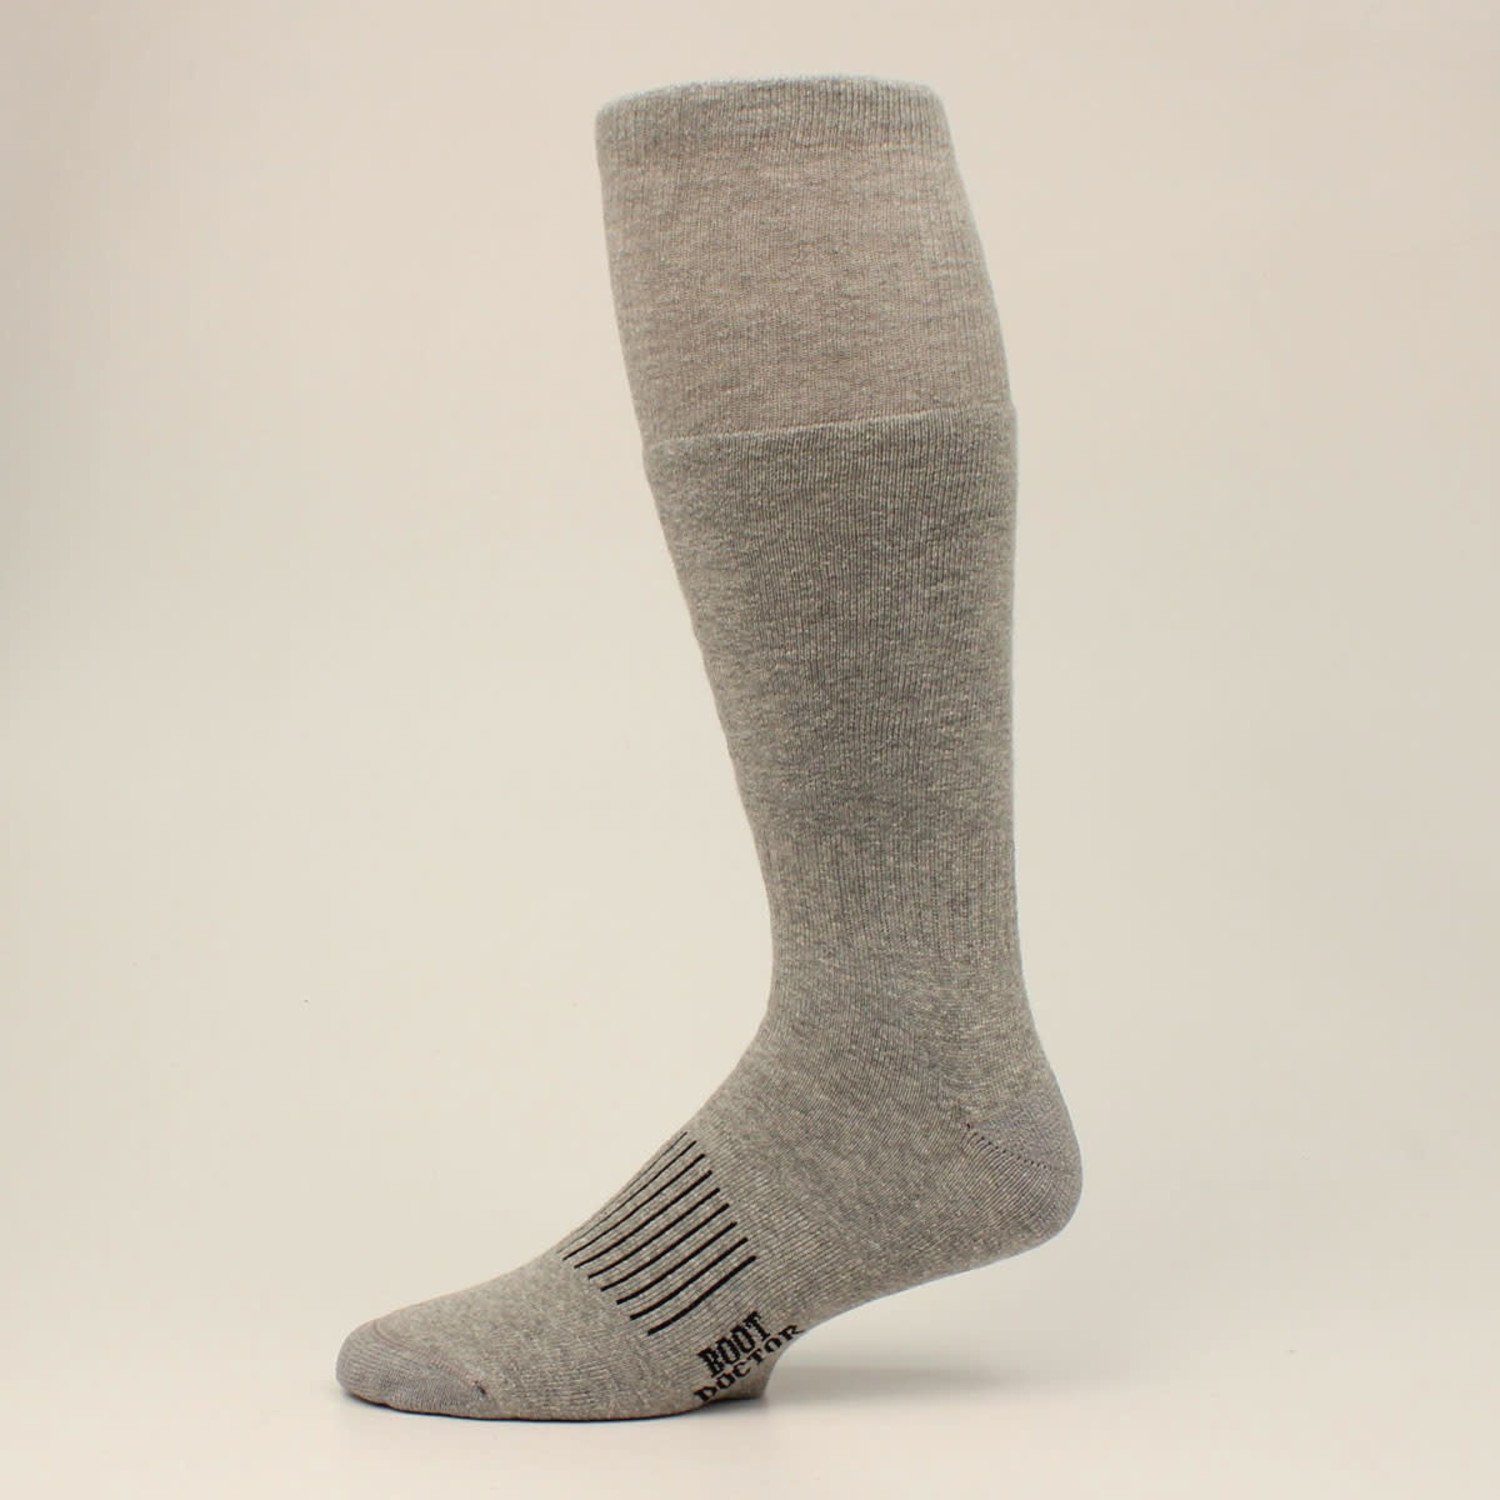 Ankle Socks for Western Boots, Ankle Socks - Gray